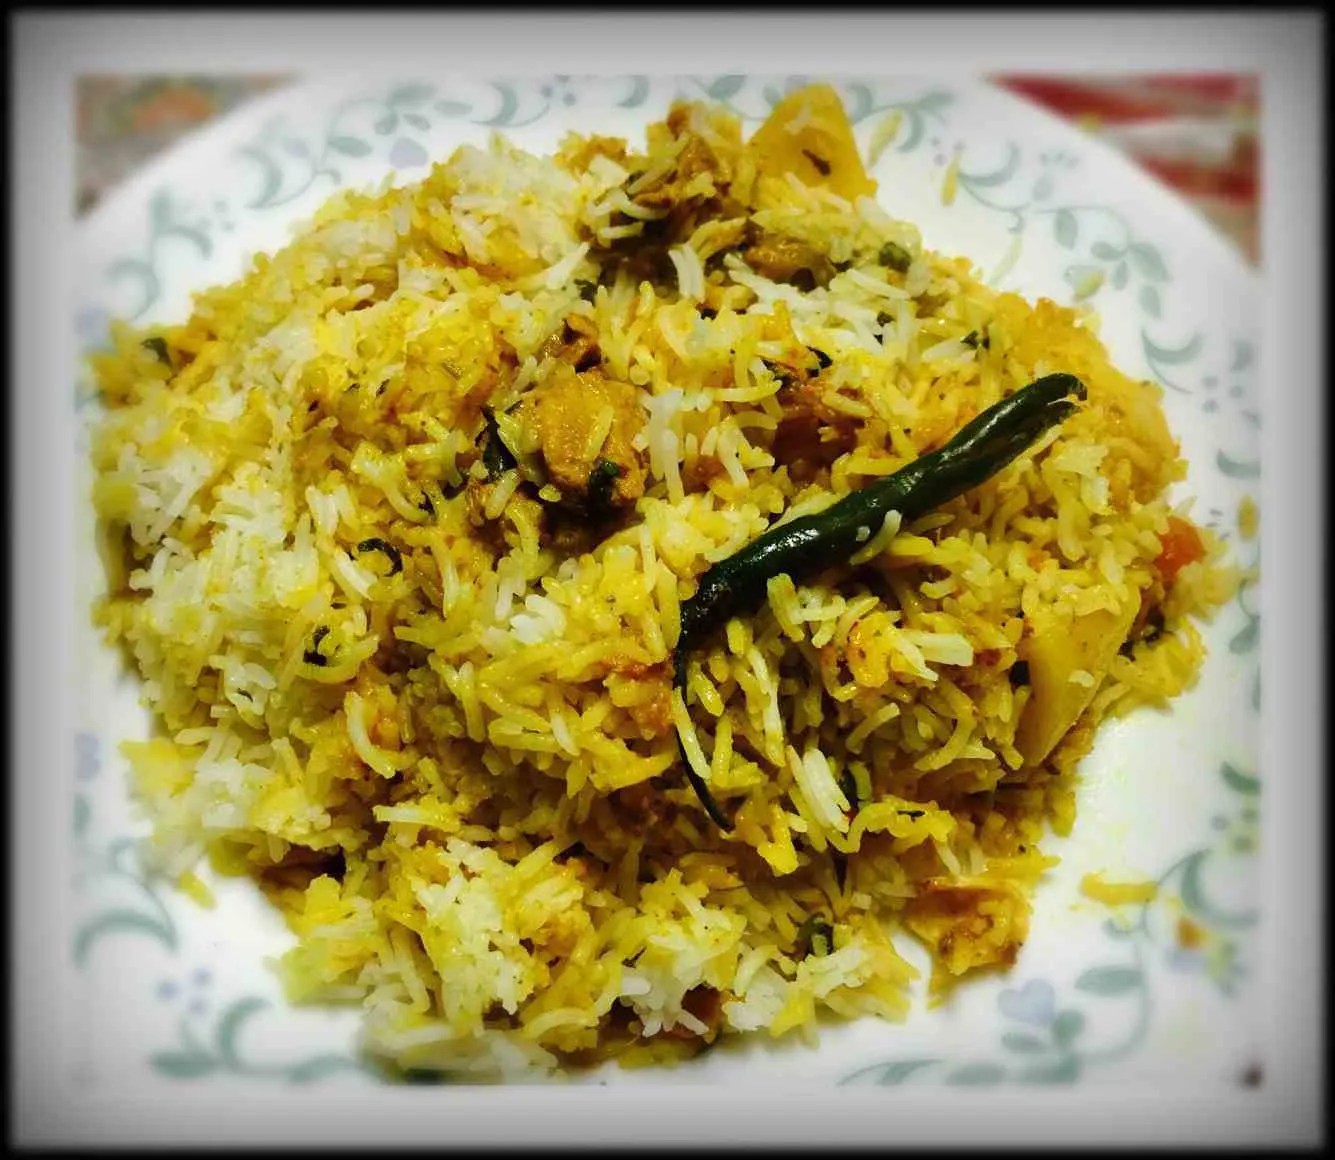 Chicken Biryani Recipe – Cook with Ease